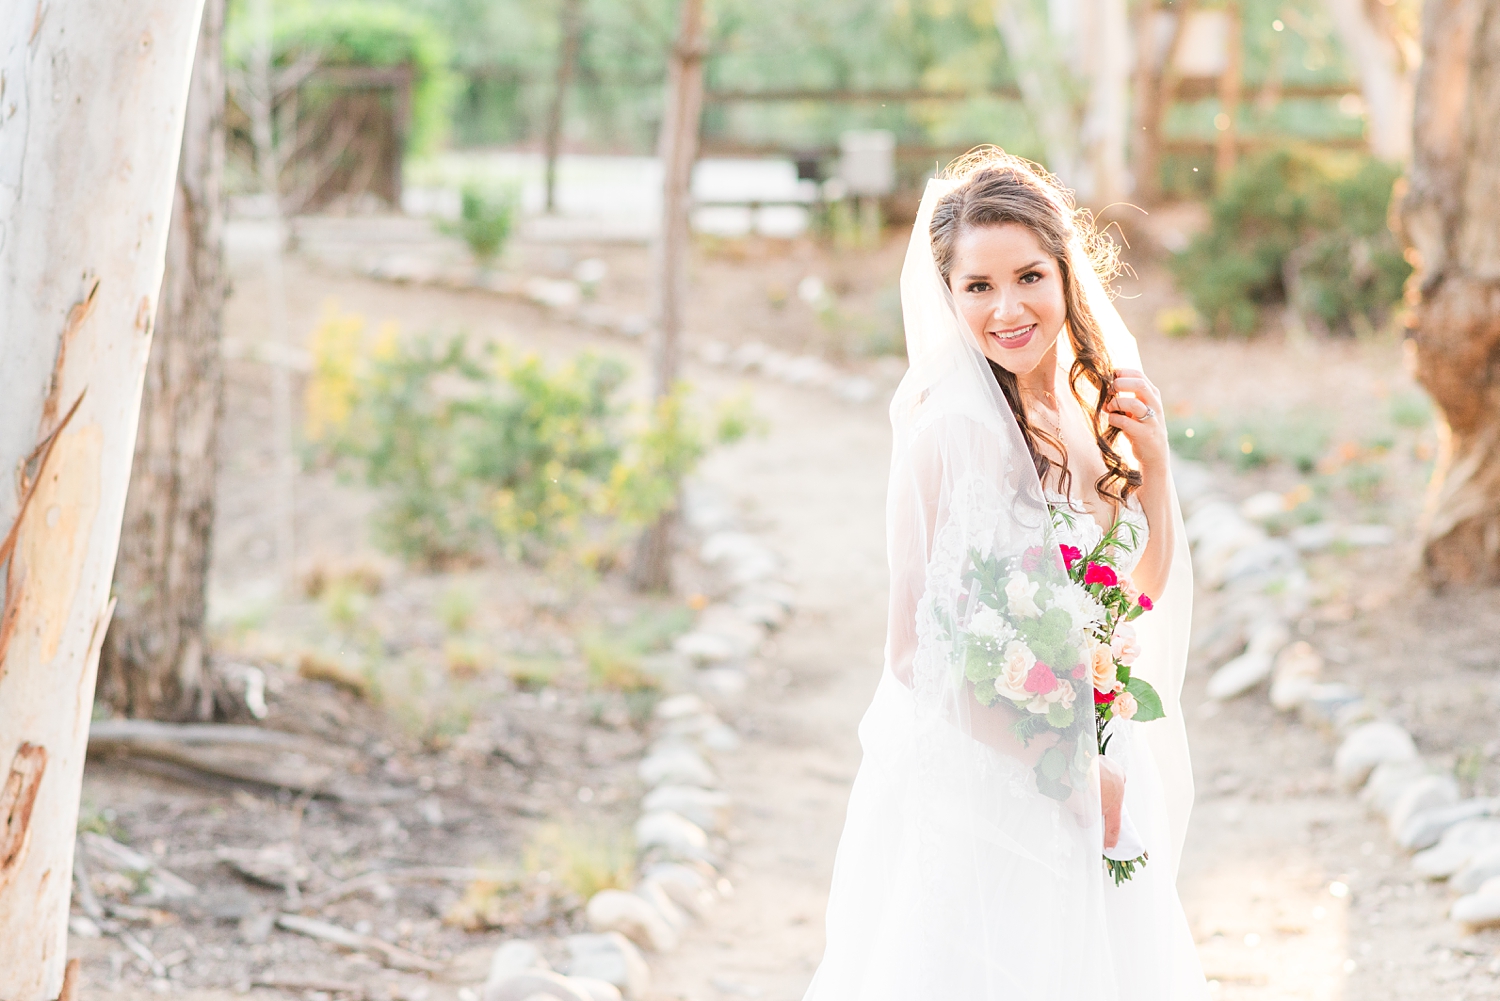 Bridal Session in a winery in temecula from a Temecula Wedding Photographer_0015.jpg